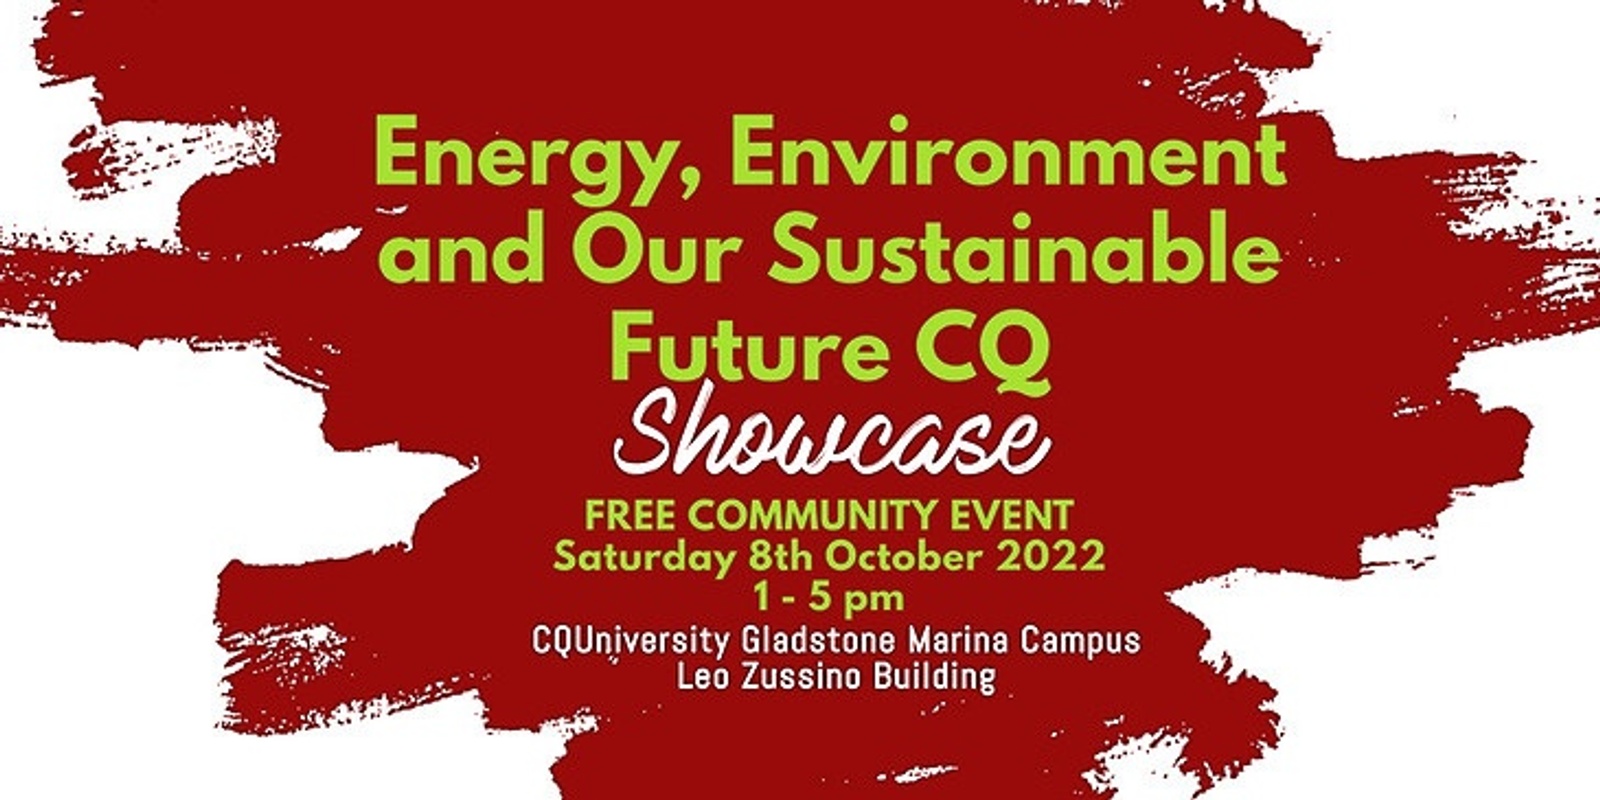 Banner image for Energy, Environment and Our Sustainable Future CQ Showcase